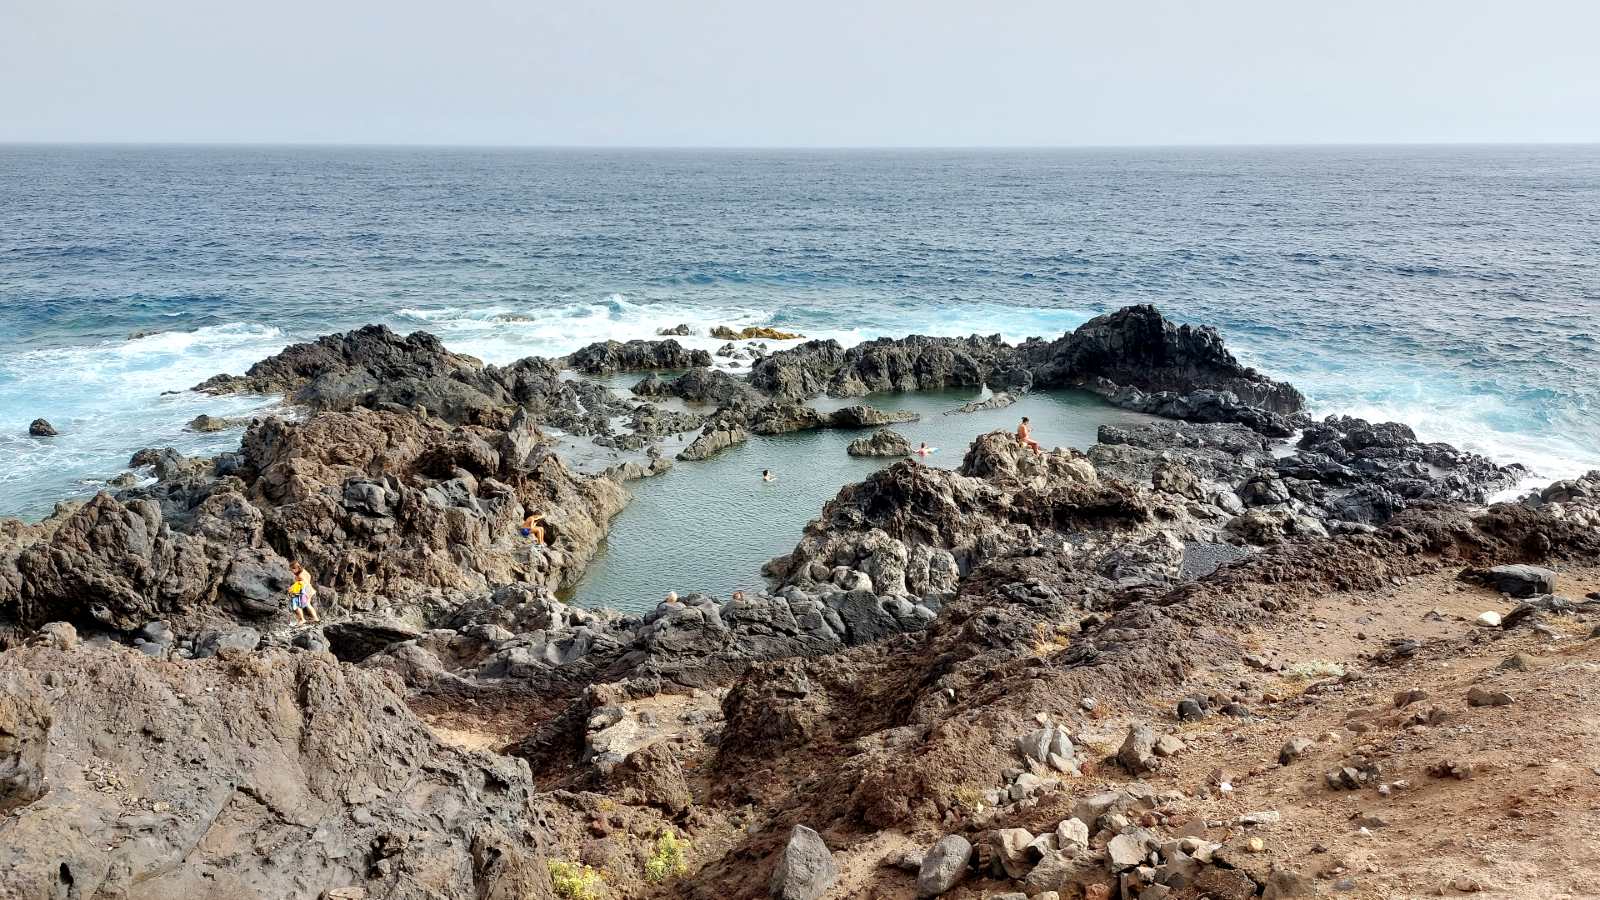 The natural pools in the north of Tenerife are original bathing places created by lava 